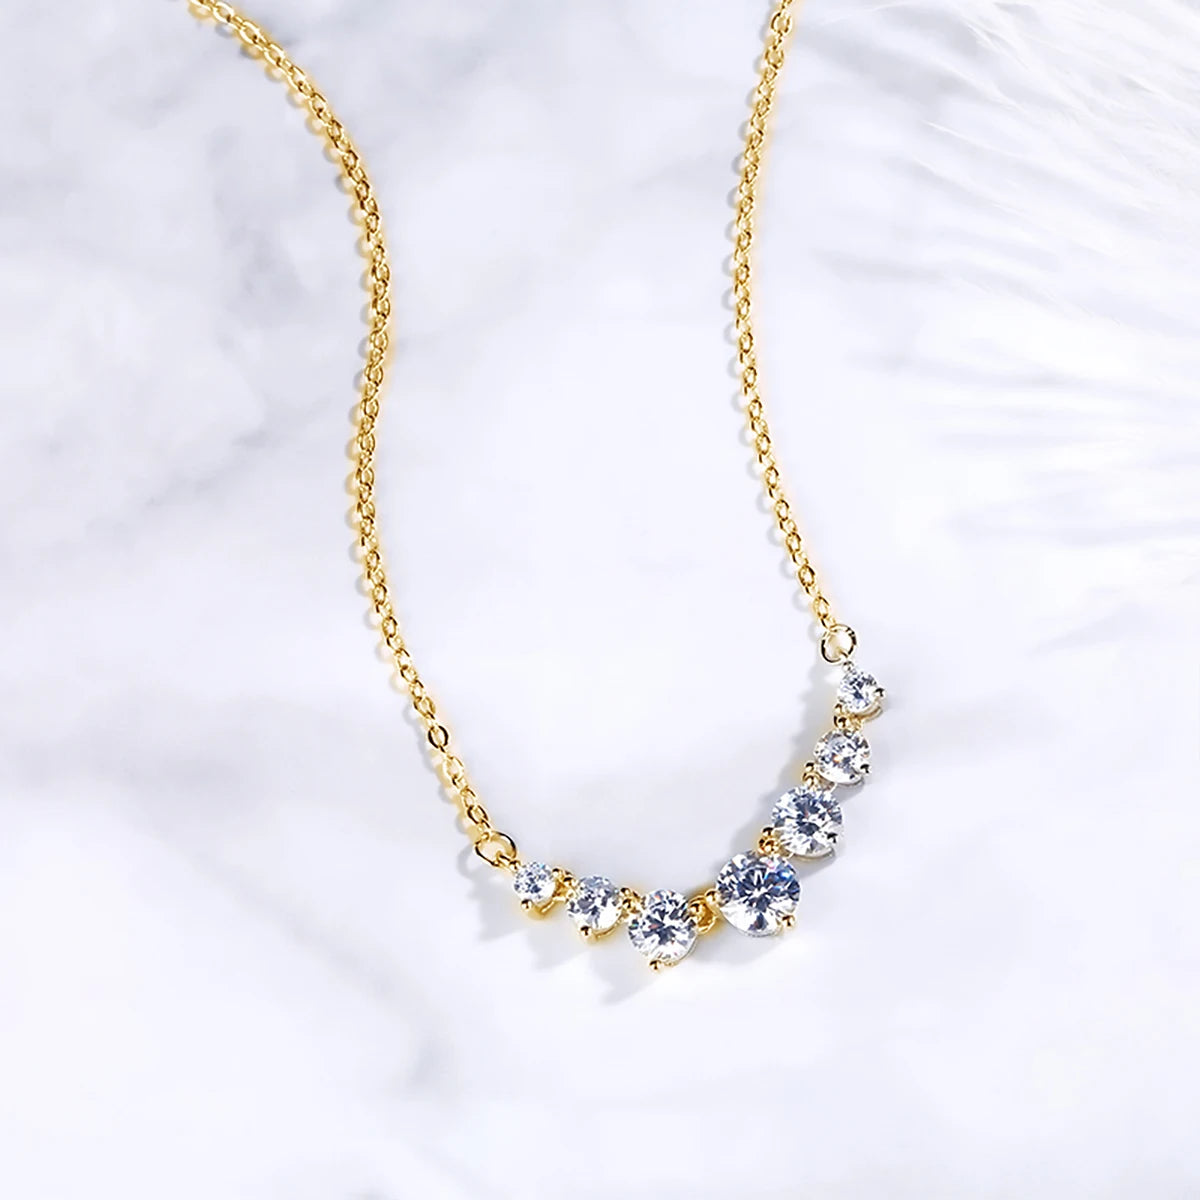 2.8ct moissanite necklace